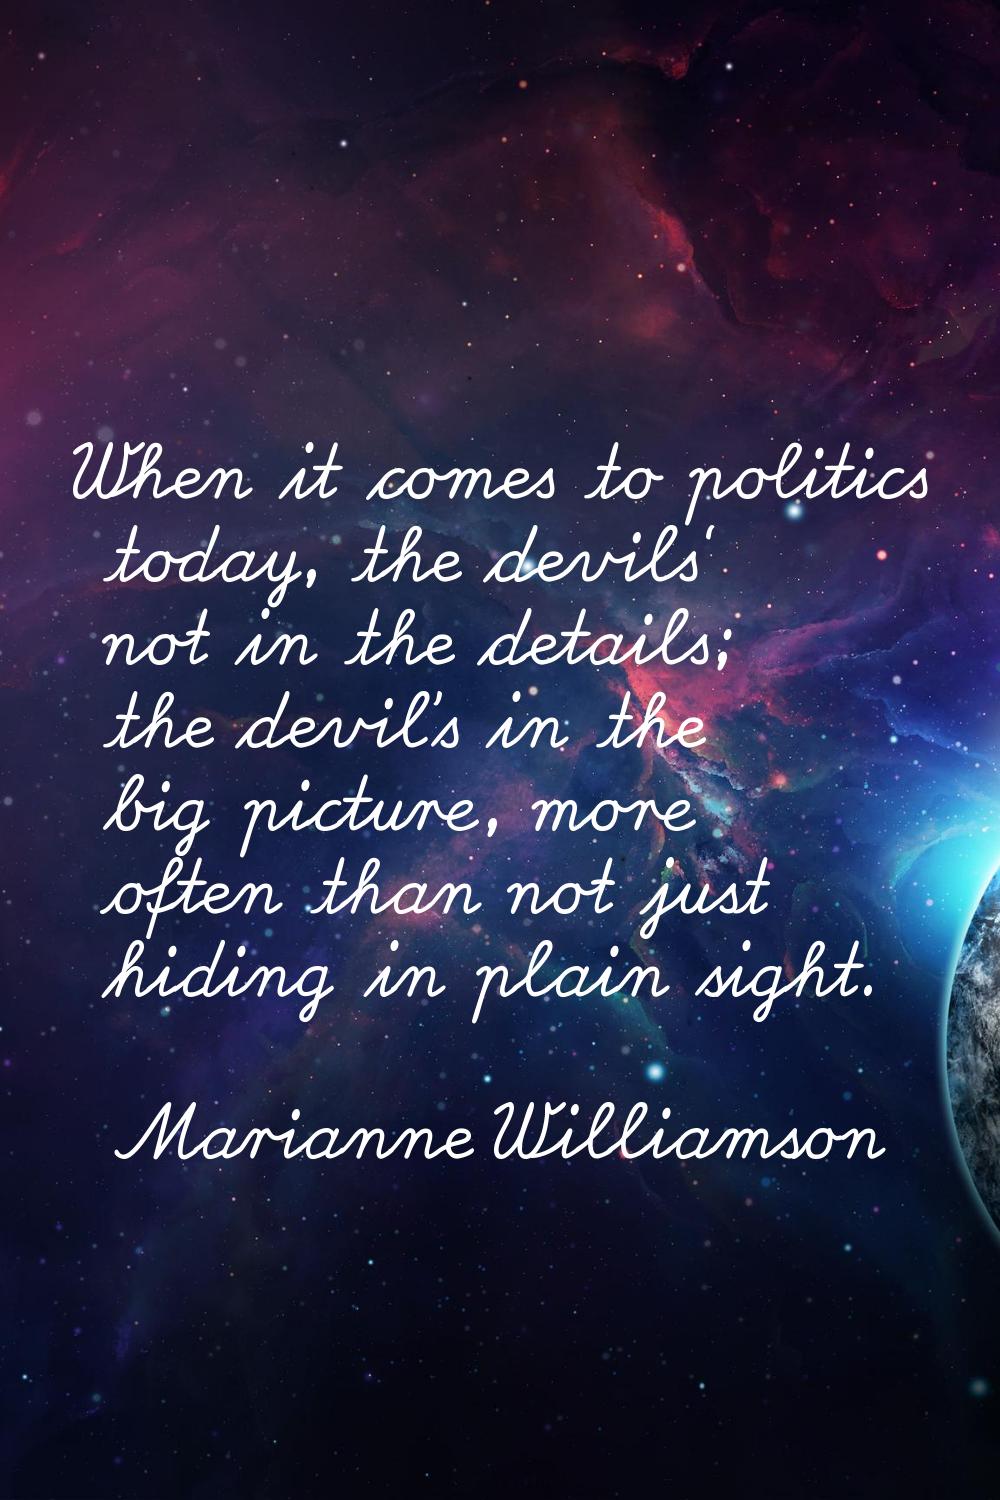 When it comes to politics today, the devils' not in the details; the devil's in the big picture, mo